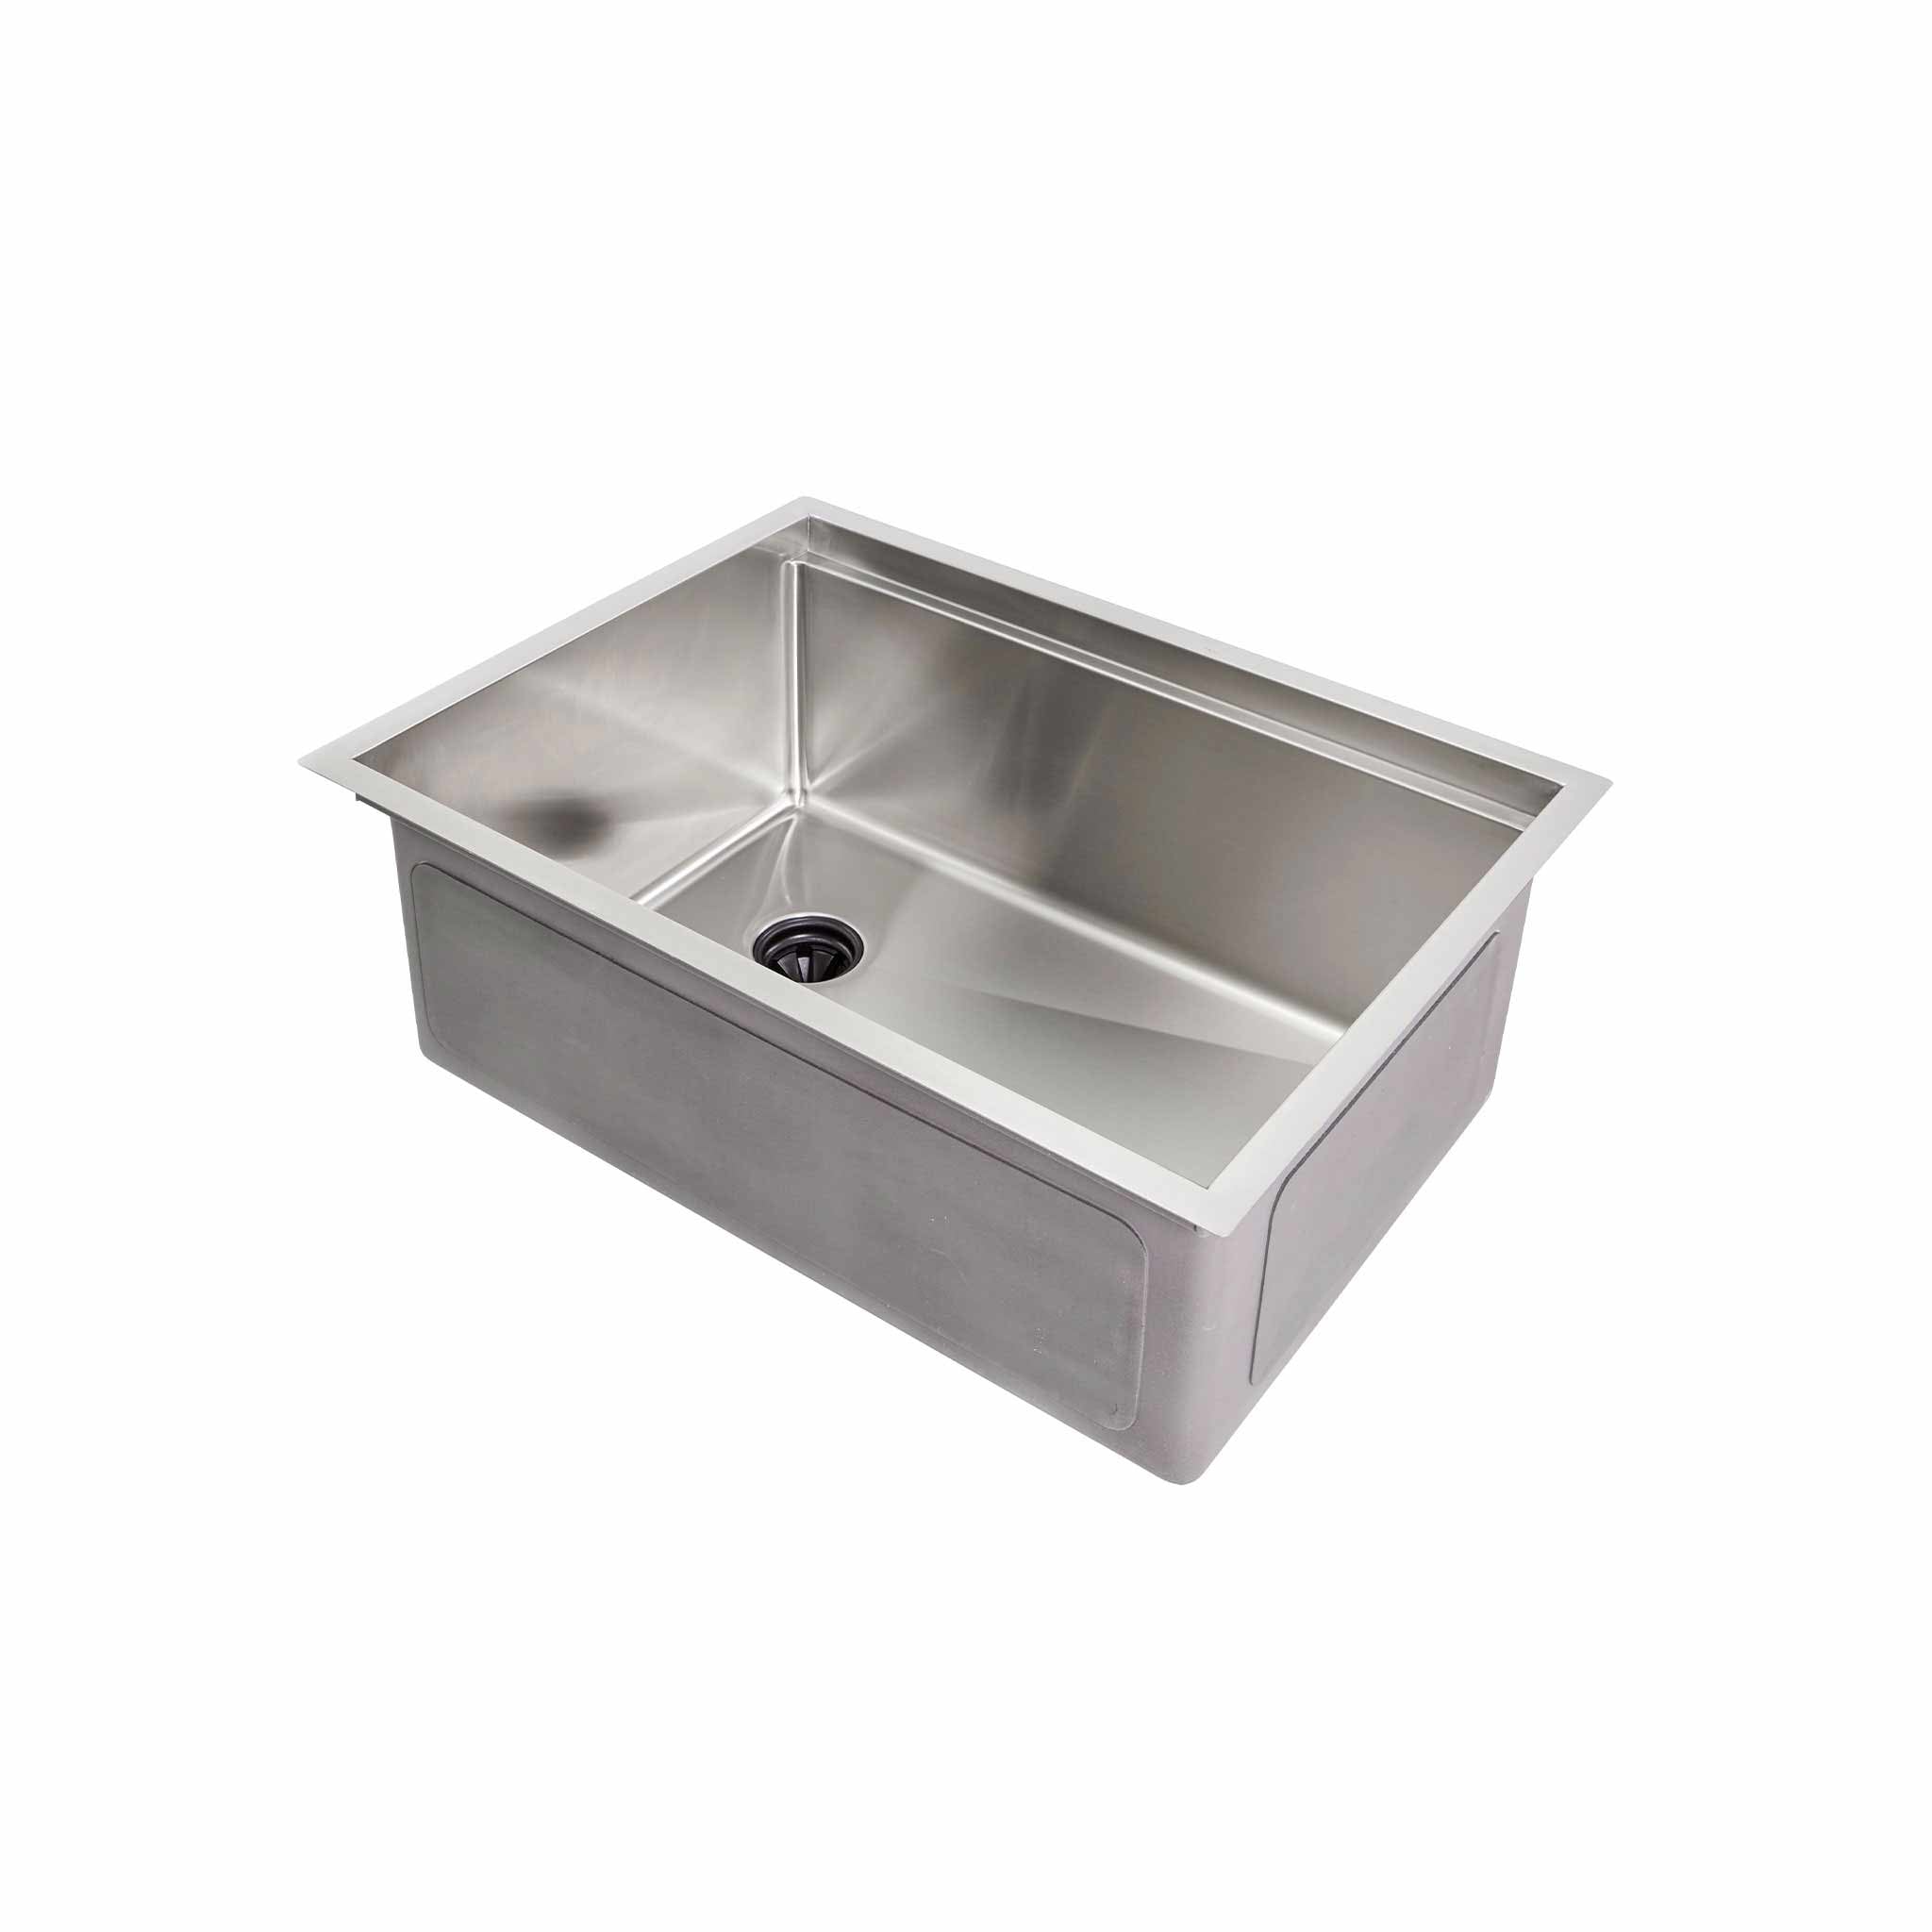 26" workstation sink with offset drain left. Made with 16 gauge type 304 stainless steel and designed for undermount installation.  Features Create Good Sinks' patented, award-winning seamless drain